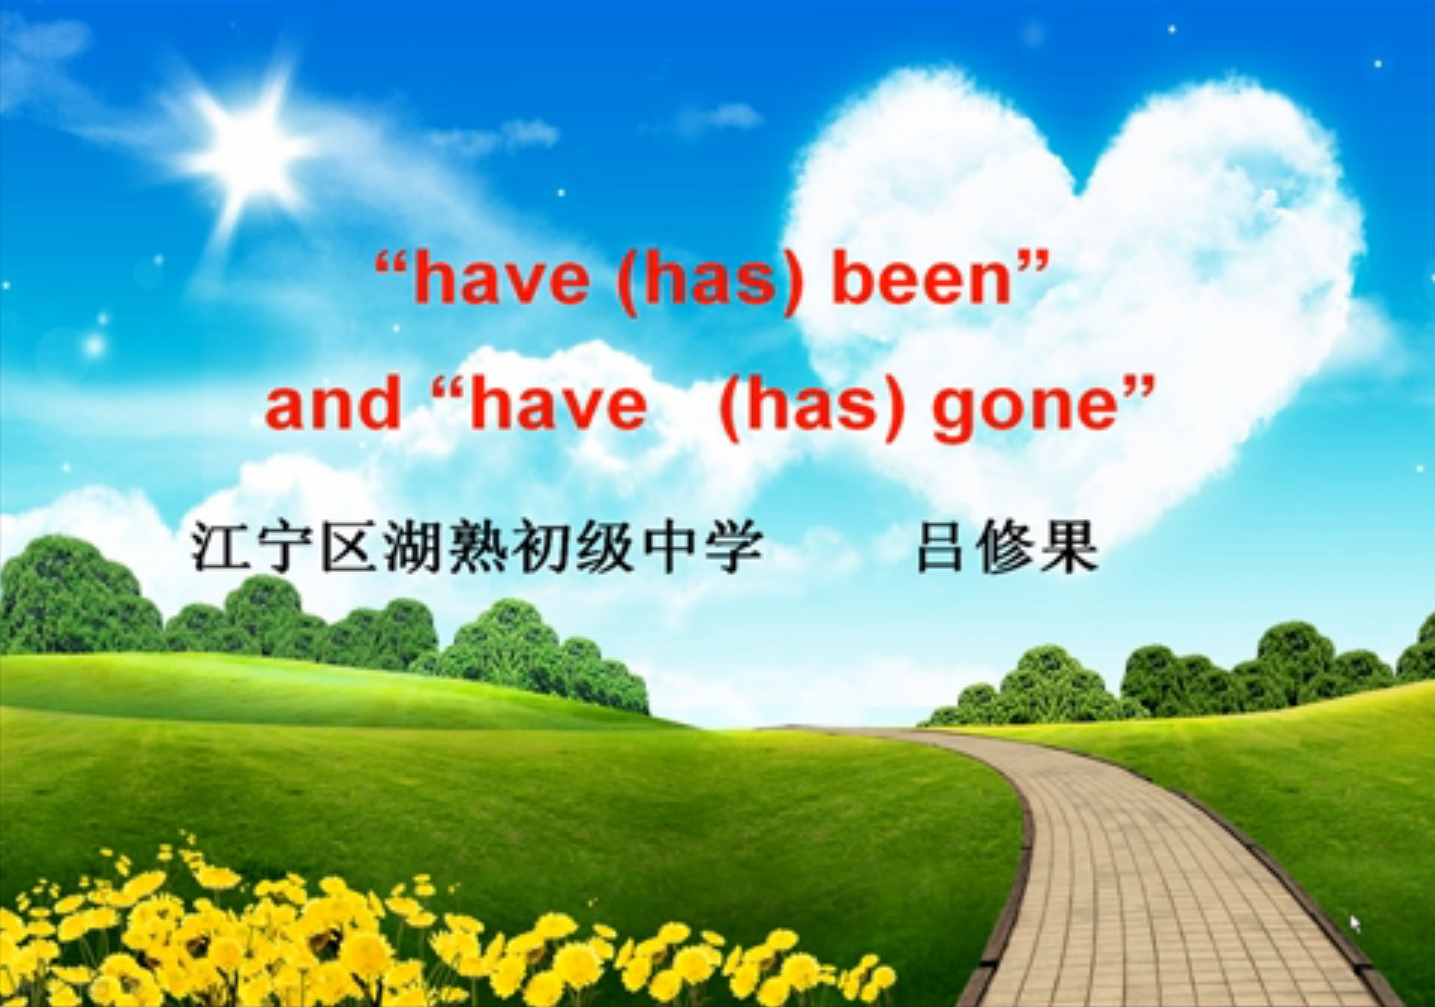 "have/has been" and "have/has gone"